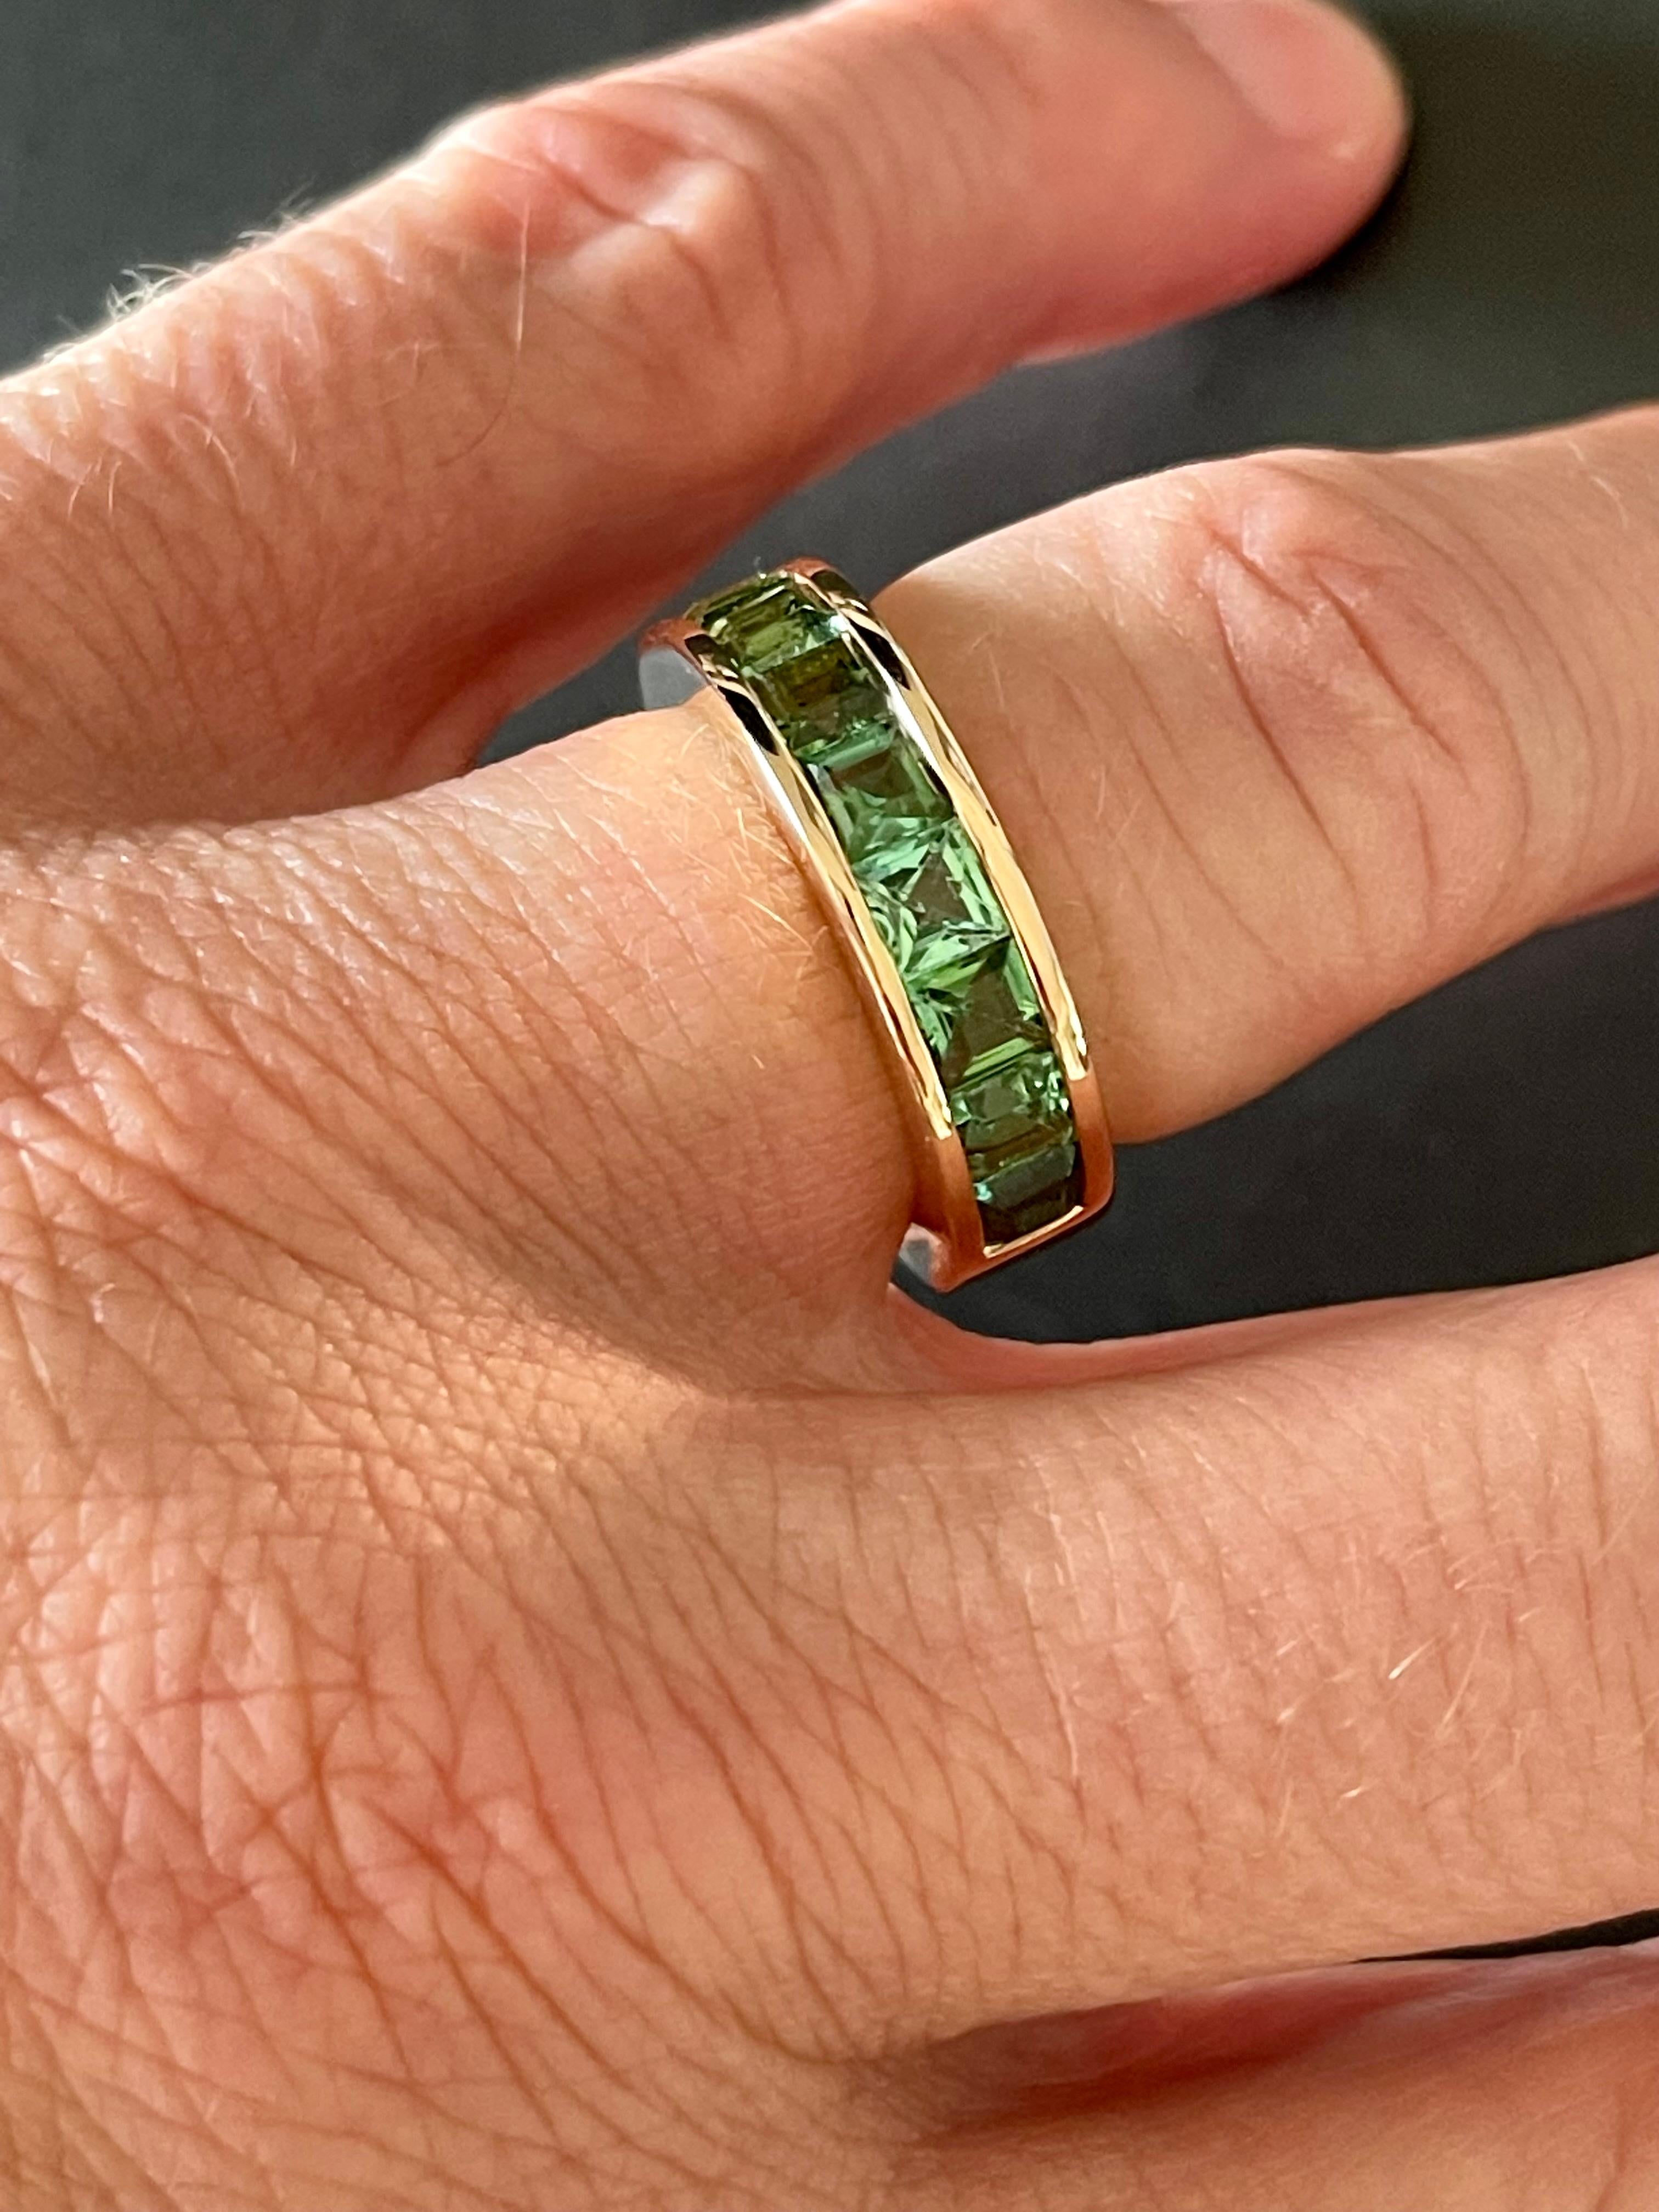 Solid 18 K rose Gold Eternity Ring set with 10 square cut Mint Green Tourmalines weighing 3.29 in a channel setting. 
Each  stone is faceted and well-matched in shape and color. Natural variations in hue and intensity add to the beauty of this ring.